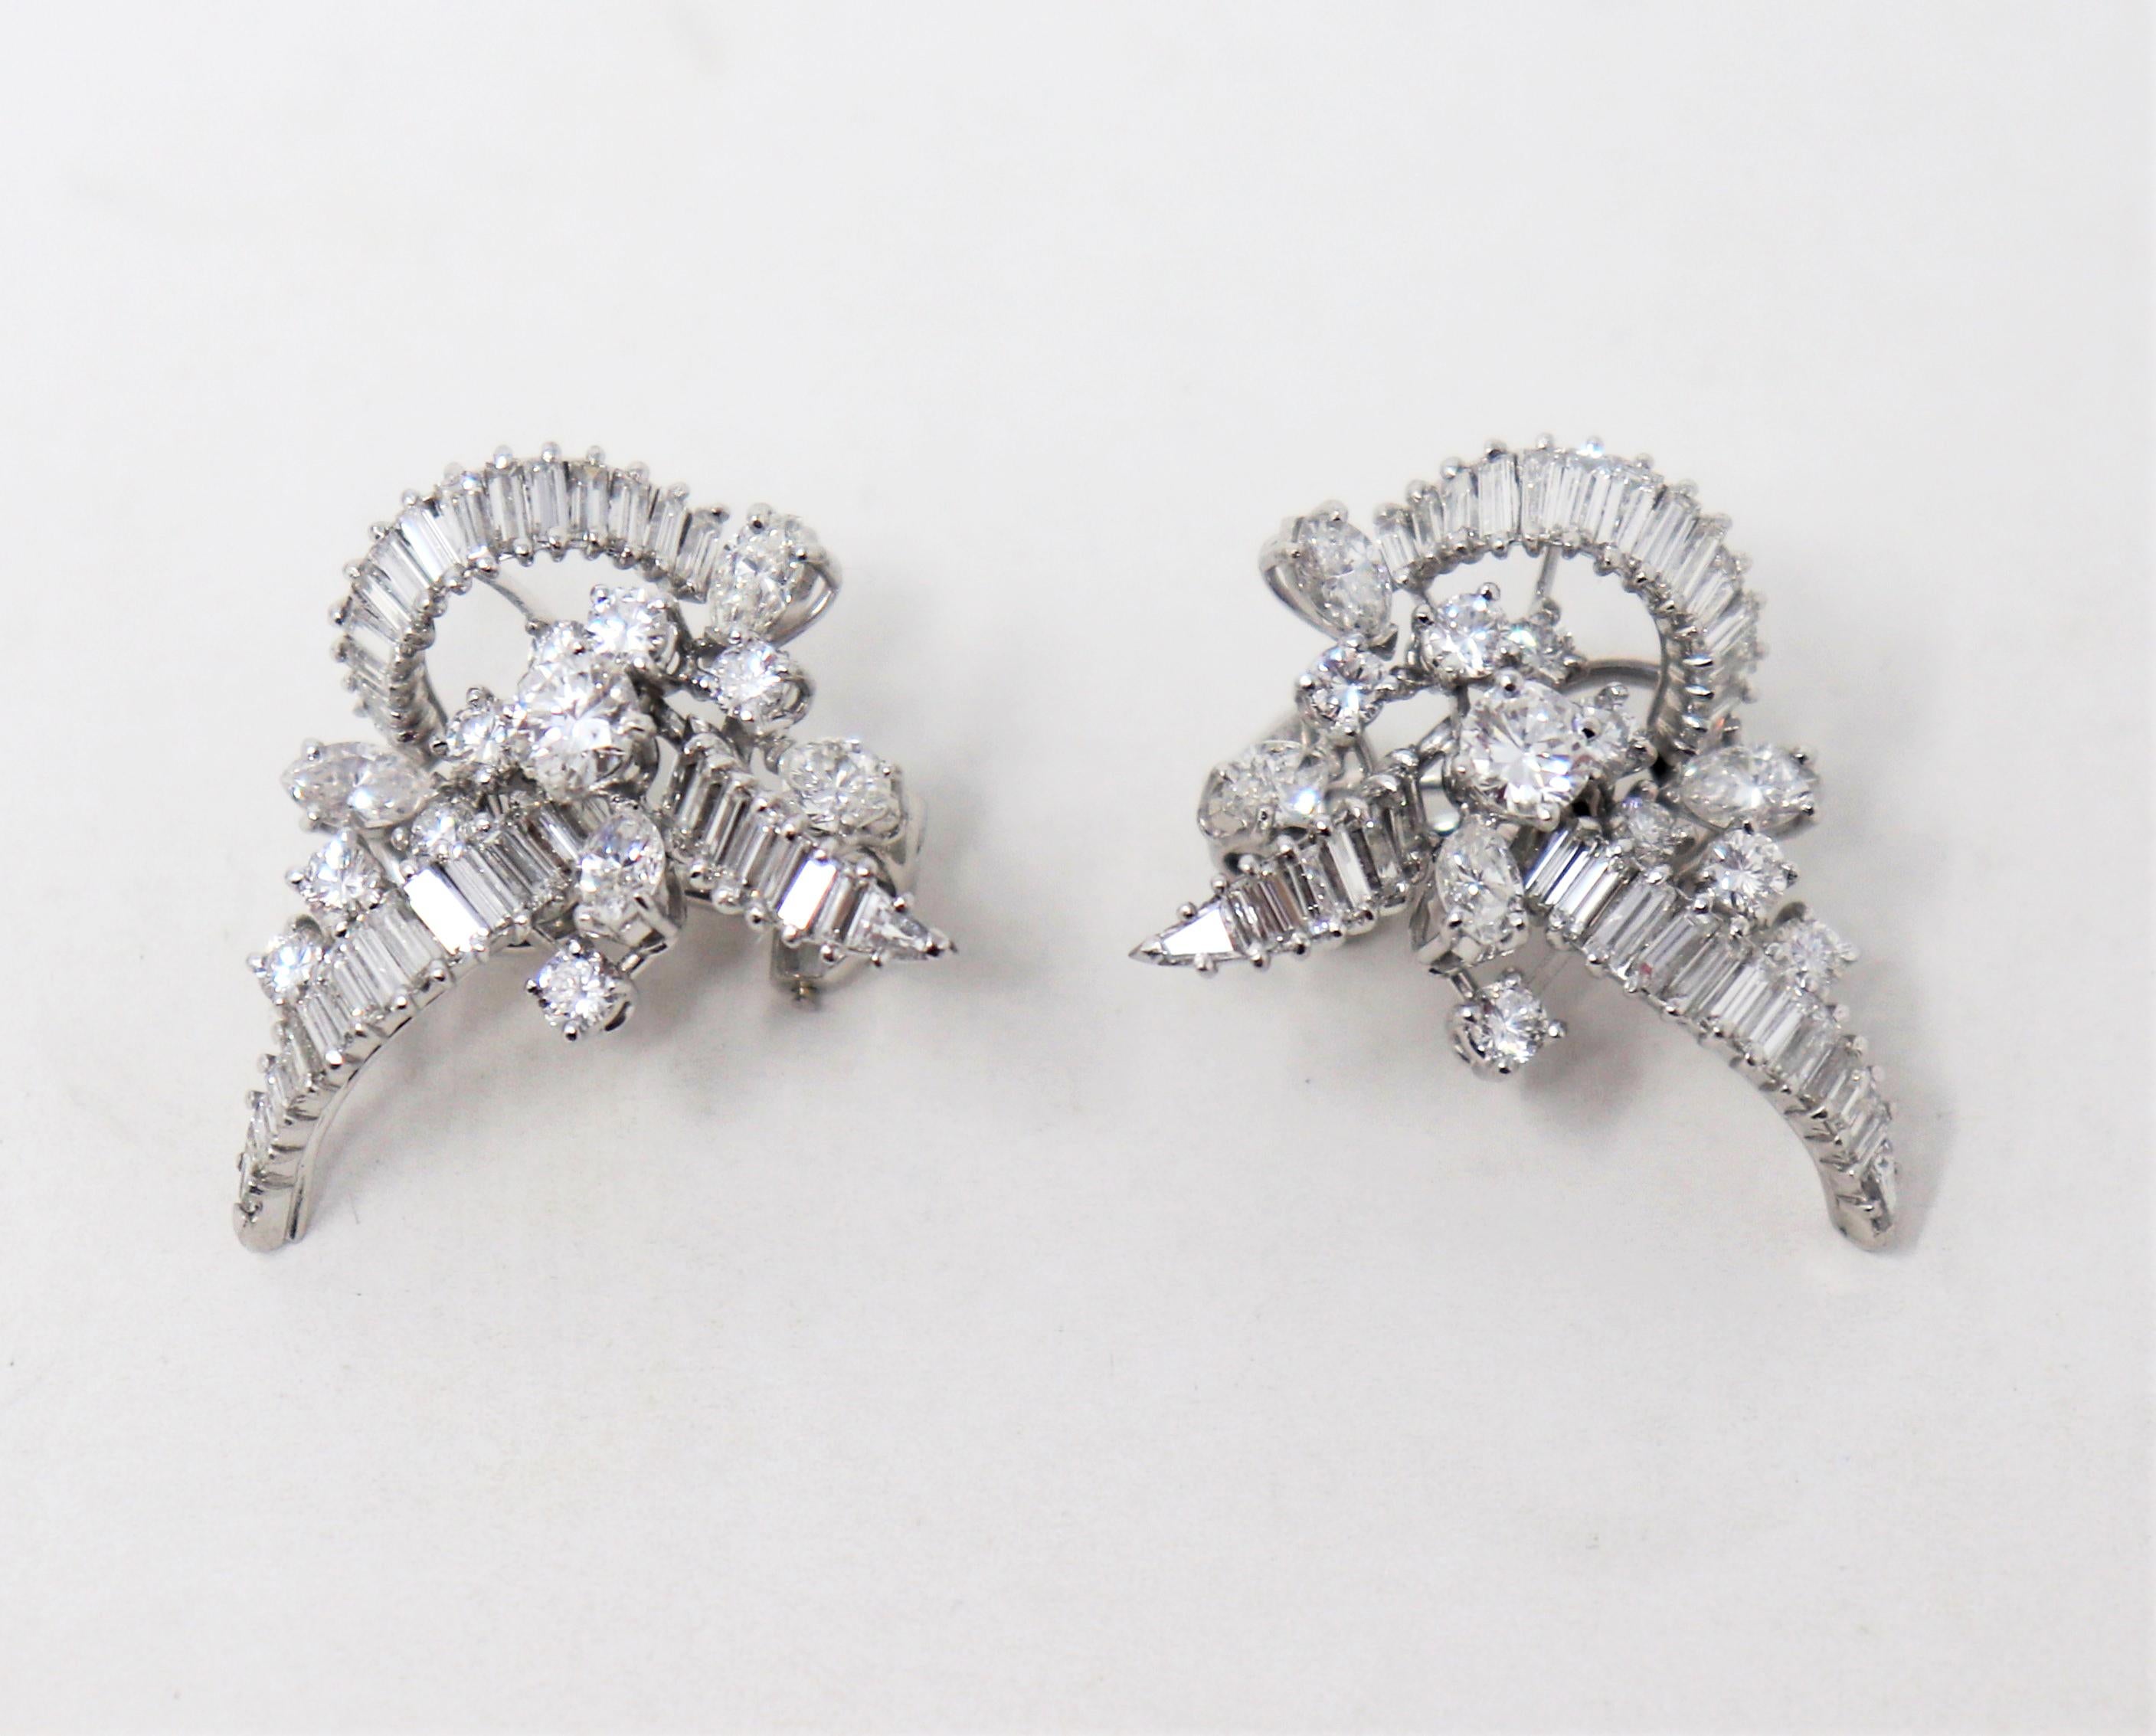 Baguette Cut Baguette, Round and Marquis Diamond Cluster Earrings in Platinum with Omega Back For Sale